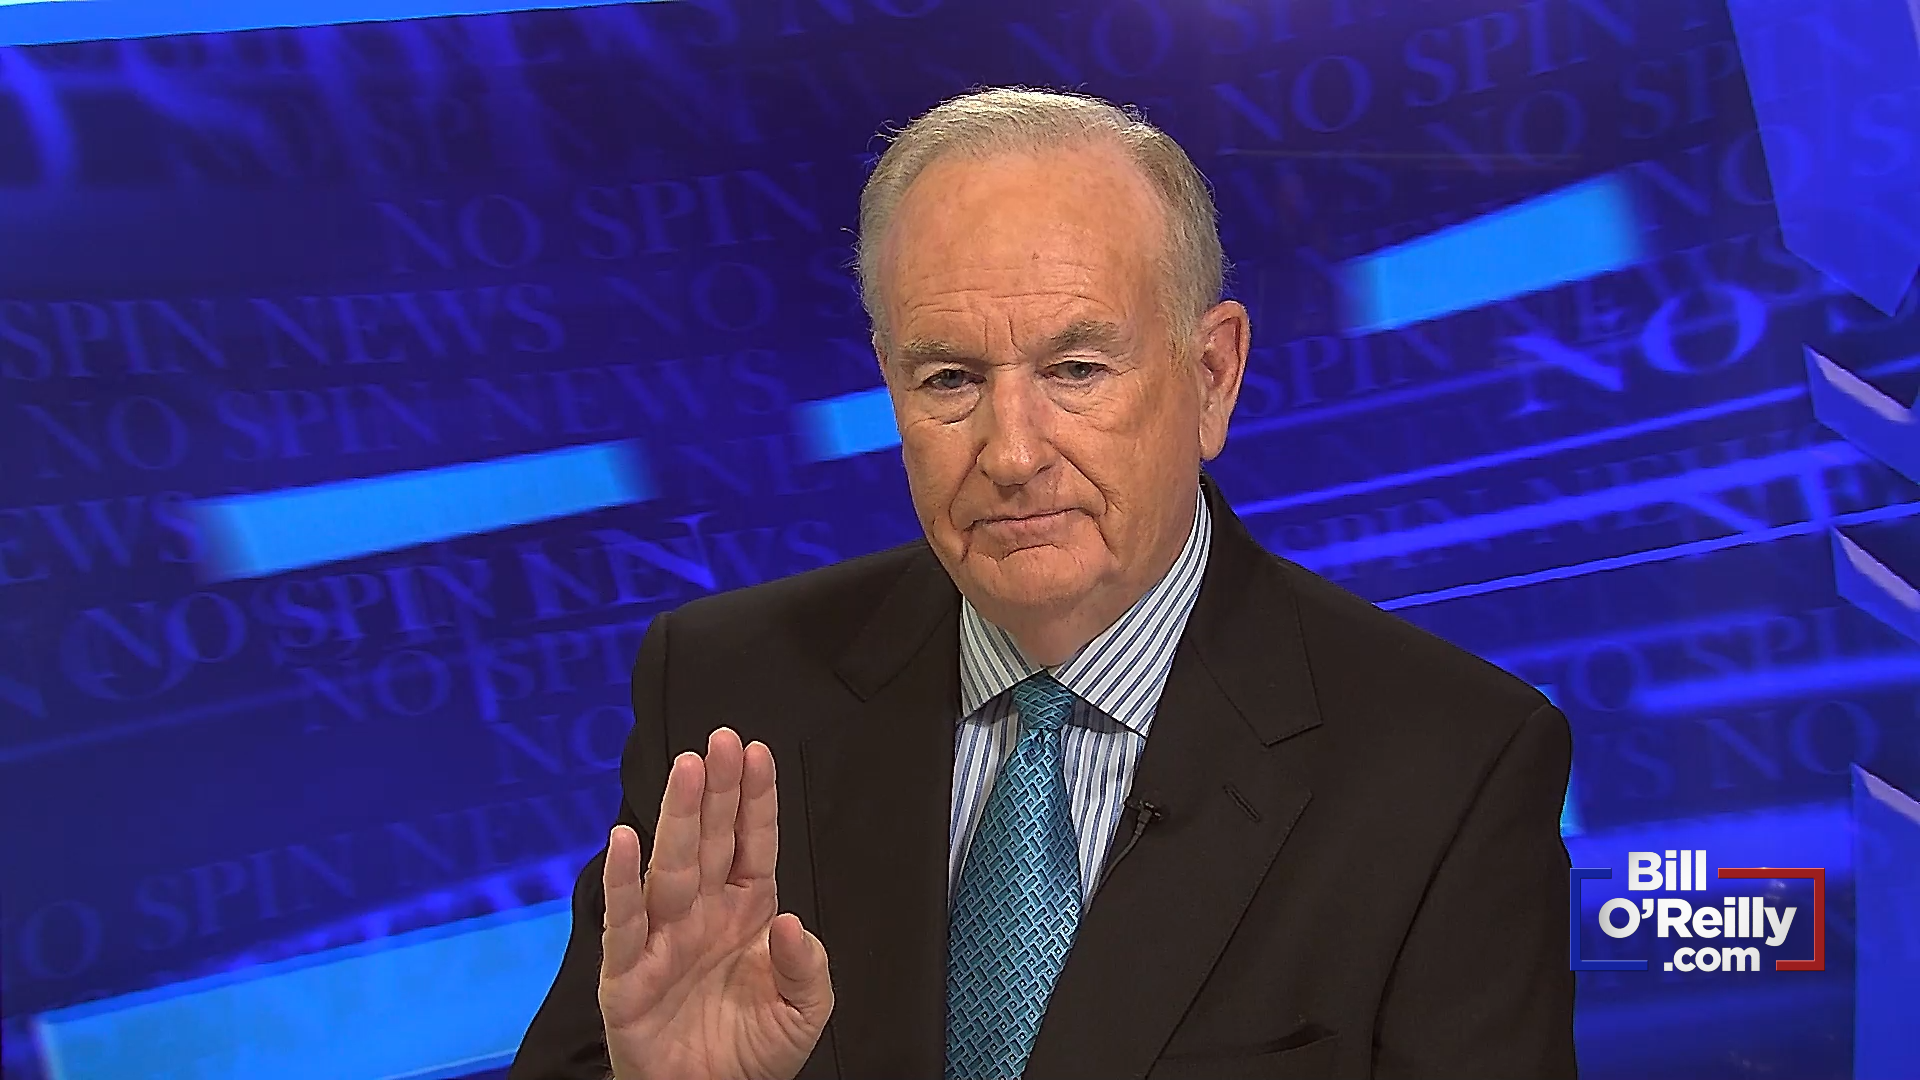 O'Reilly Warns Progressive Left: 'Don't You Dare Call Me A Racist'